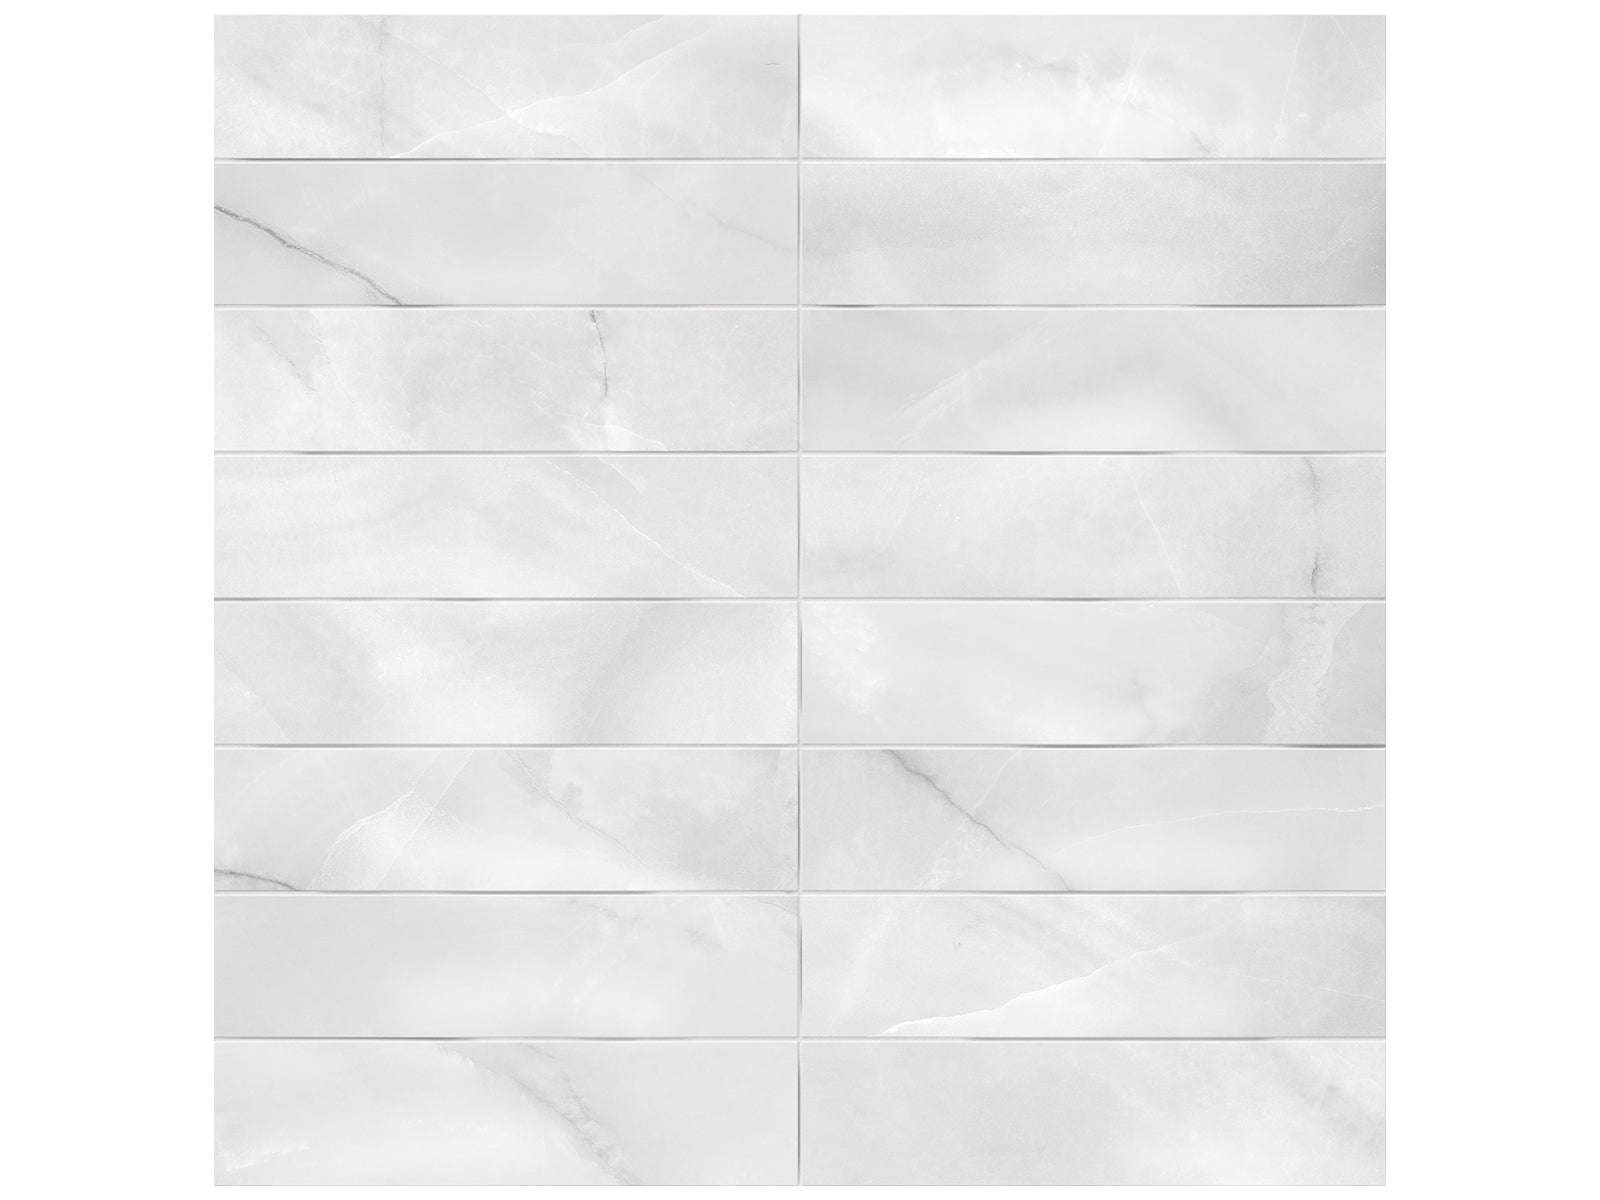 onyx suave embossed pattern glazed ceramic wall tile from raffino anatolia collection distributed by surface group international matte finish pressed edge 3x12 rectangle shape